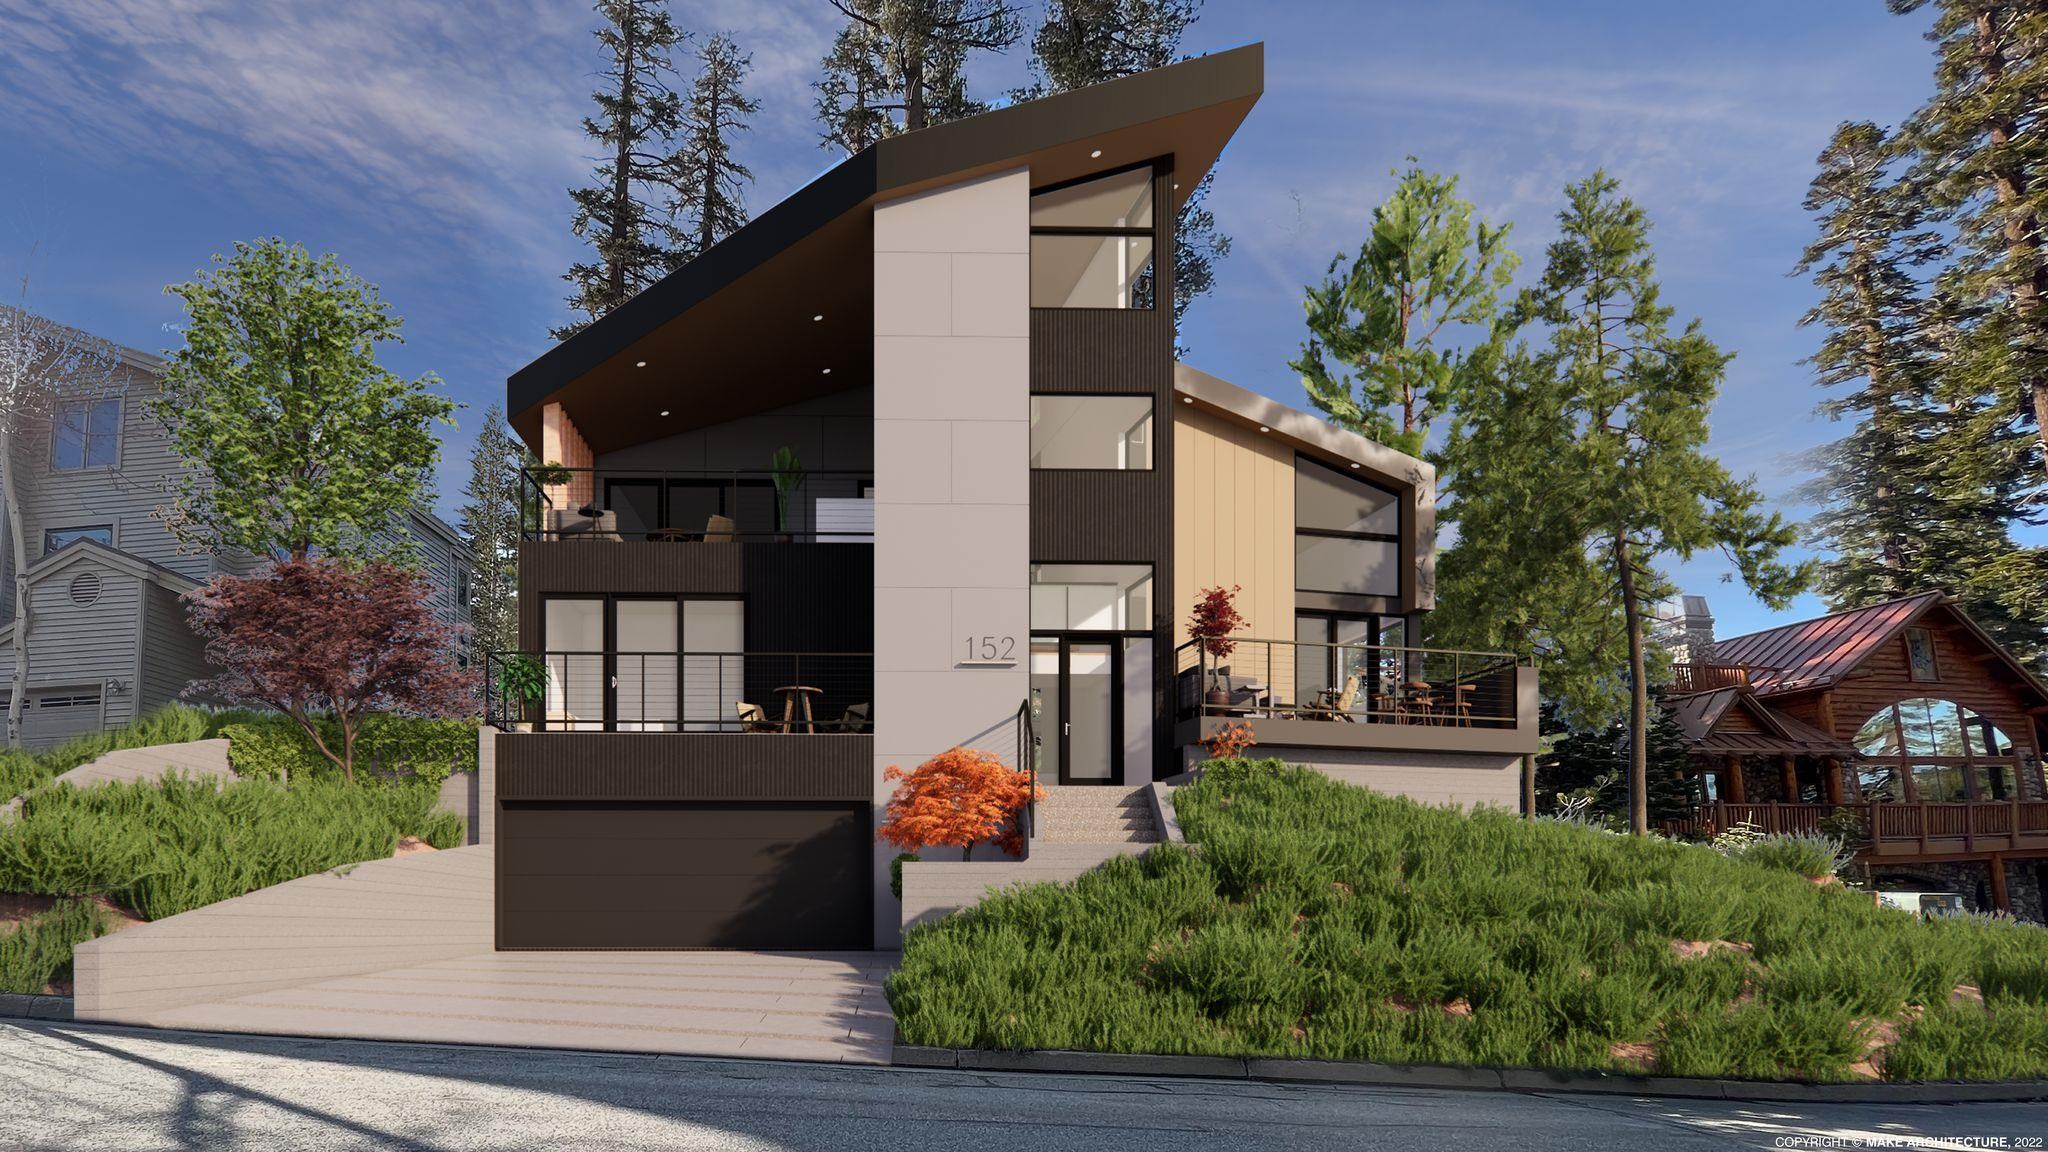 From the Builders of The Villas at Obsidian a brand new ultra-modern Architectural design .04 miles to Canyon Lodge. Construction starting Spring 2023. Located on one of the most coveted streets in Mammoth Slopes. At 3,910 square feet this five bedroom four and half bath home sits high atop its hillside lot with stunning 180-degree views spanning from the Sherwins to Mammoth Mountain. This sophisticated retreat offers the utmost privacy & lives intimately while seamlessly transitioning for gracious entertaining. Indoor-outdoor living blends meticulously with the great room with open dining. Features include engineered hardwood oak floors, high cathedral ceilings, elegant fireplaces, mud room and plenty of storage. No expense was spared in this home’s design. Bright & open with panoramic views thru-out. Gourmet kitchen with premium stainless steel appliances, white oak cabinetry and epic center island with quartz slab counters. Attention to detail is unparalleled. Entering the Primary bedroom you will notice the very spacious sitting area with fireplace looking out at one of four patio decks. Primary bathroom includes dual vanity with gorgeous brushed nickel fixtures and quartz counters. Raised bath and shower area contains mosaic porcelain tile stretching from floor to ceiling with large soaking tub. This minimalistic home showcases a highly crafted/practical floor plan making it ideal for gatherings and entertaining. Enjoy a luxury home fully adorned with high-end finishes including metal roof, fiberglass windows, two car garage and central A/C and heat. 3910 Square feet with mudroom and plenty of storage.Easy access to the Canyon Lodge Gondola to the village restaurants, shopping, and entertainment."